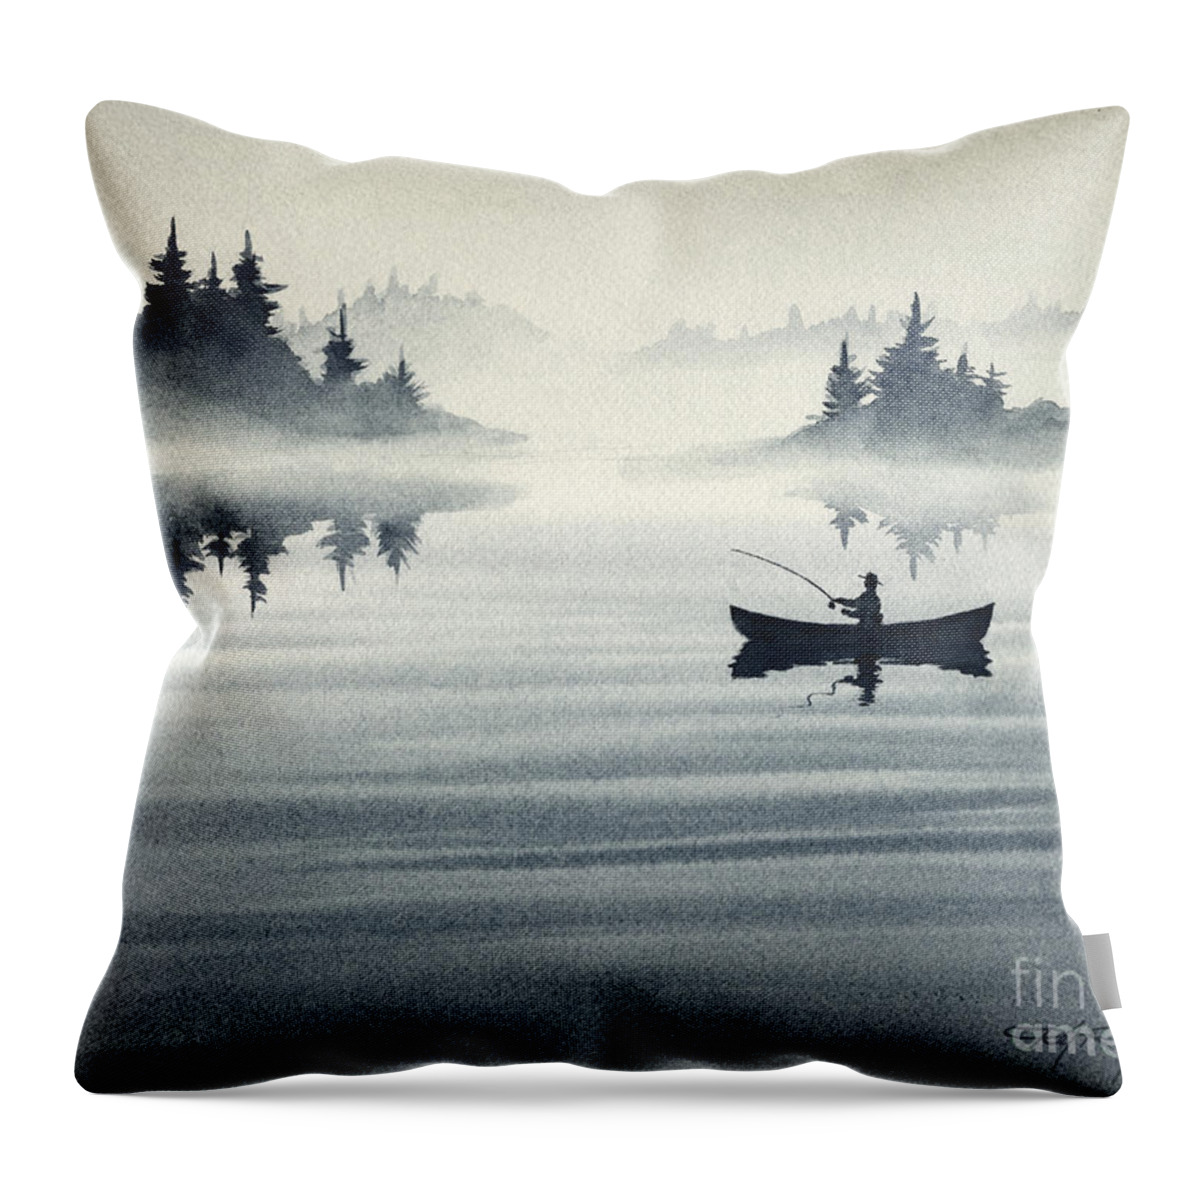 Early To Rise Throw Pillow featuring the painting Early To Rise by David Rogers